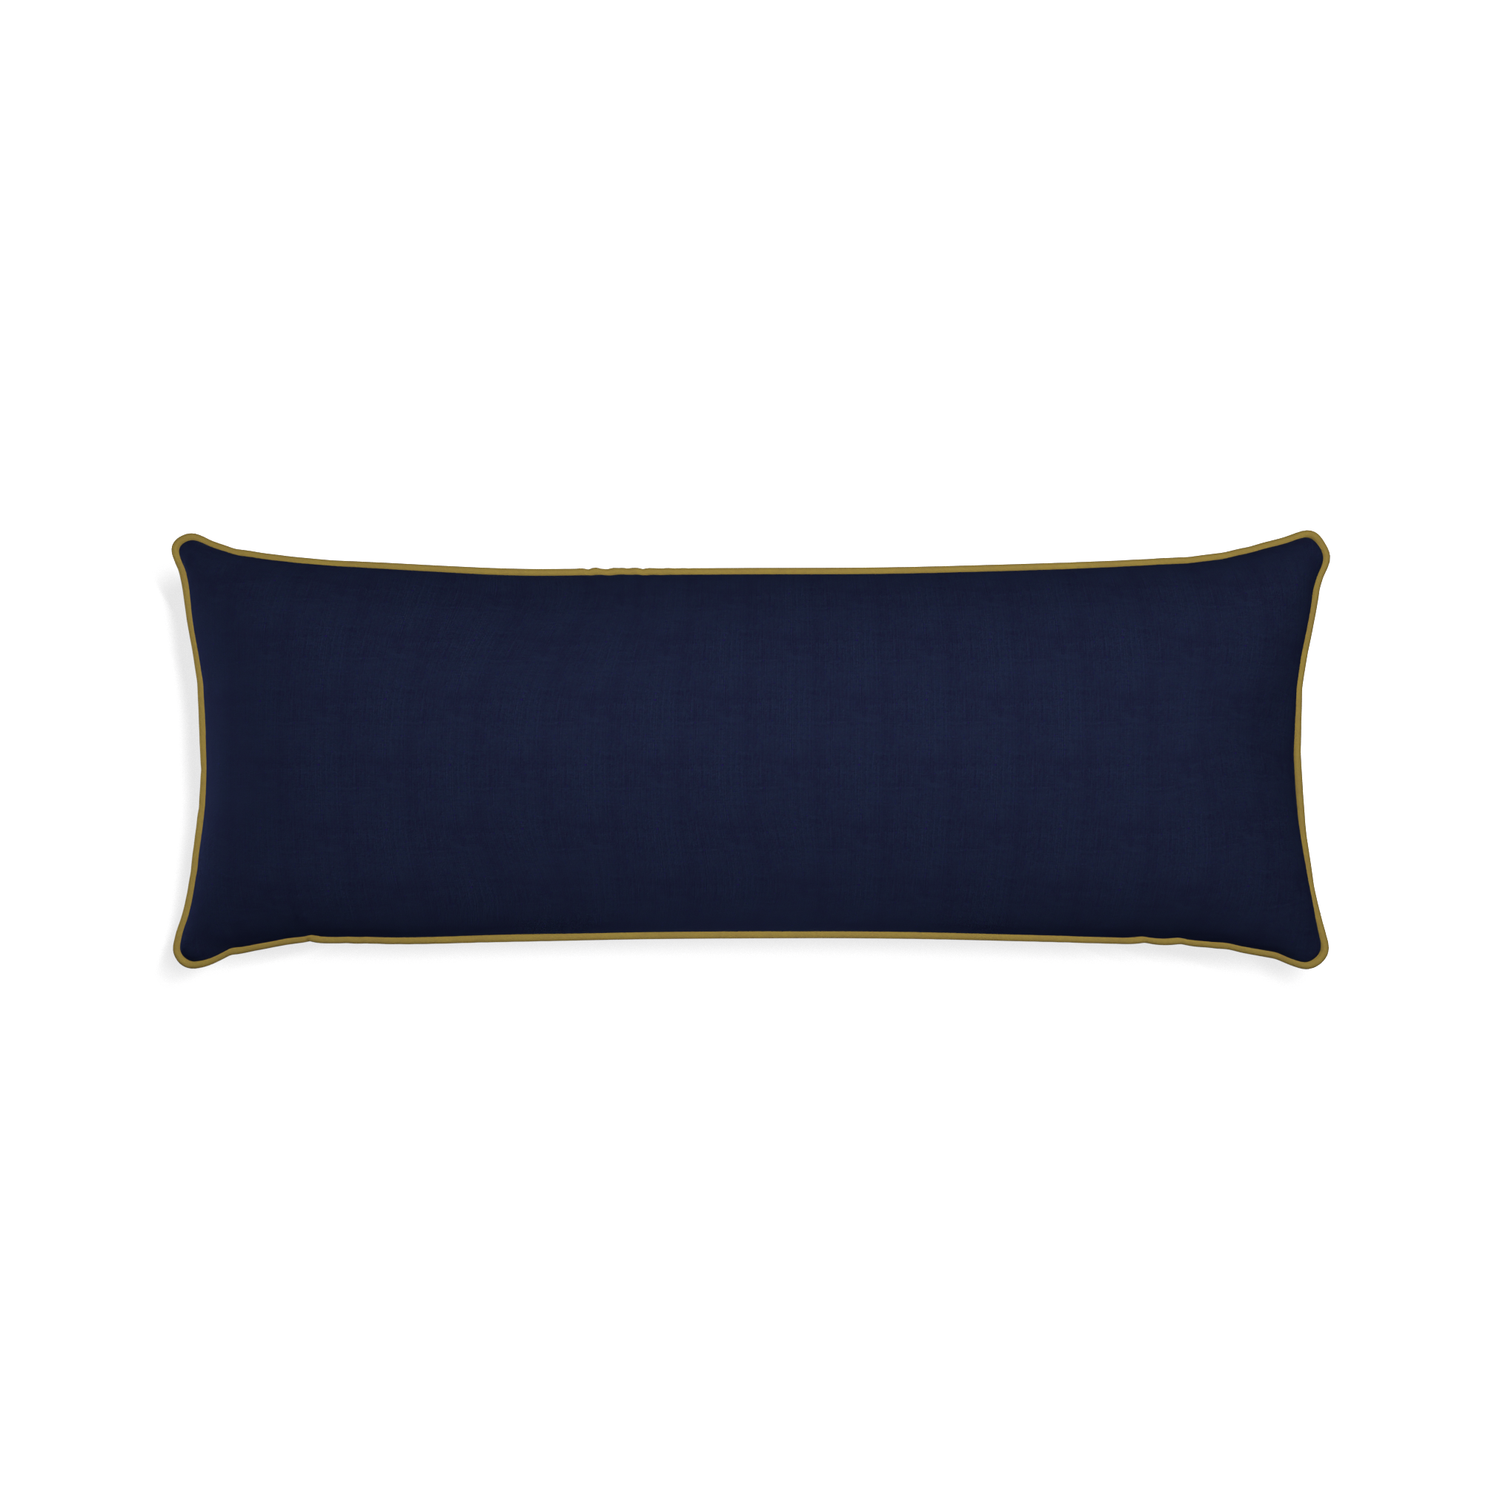 Xl-lumbar midnight custom navy bluepillow with c piping on white background